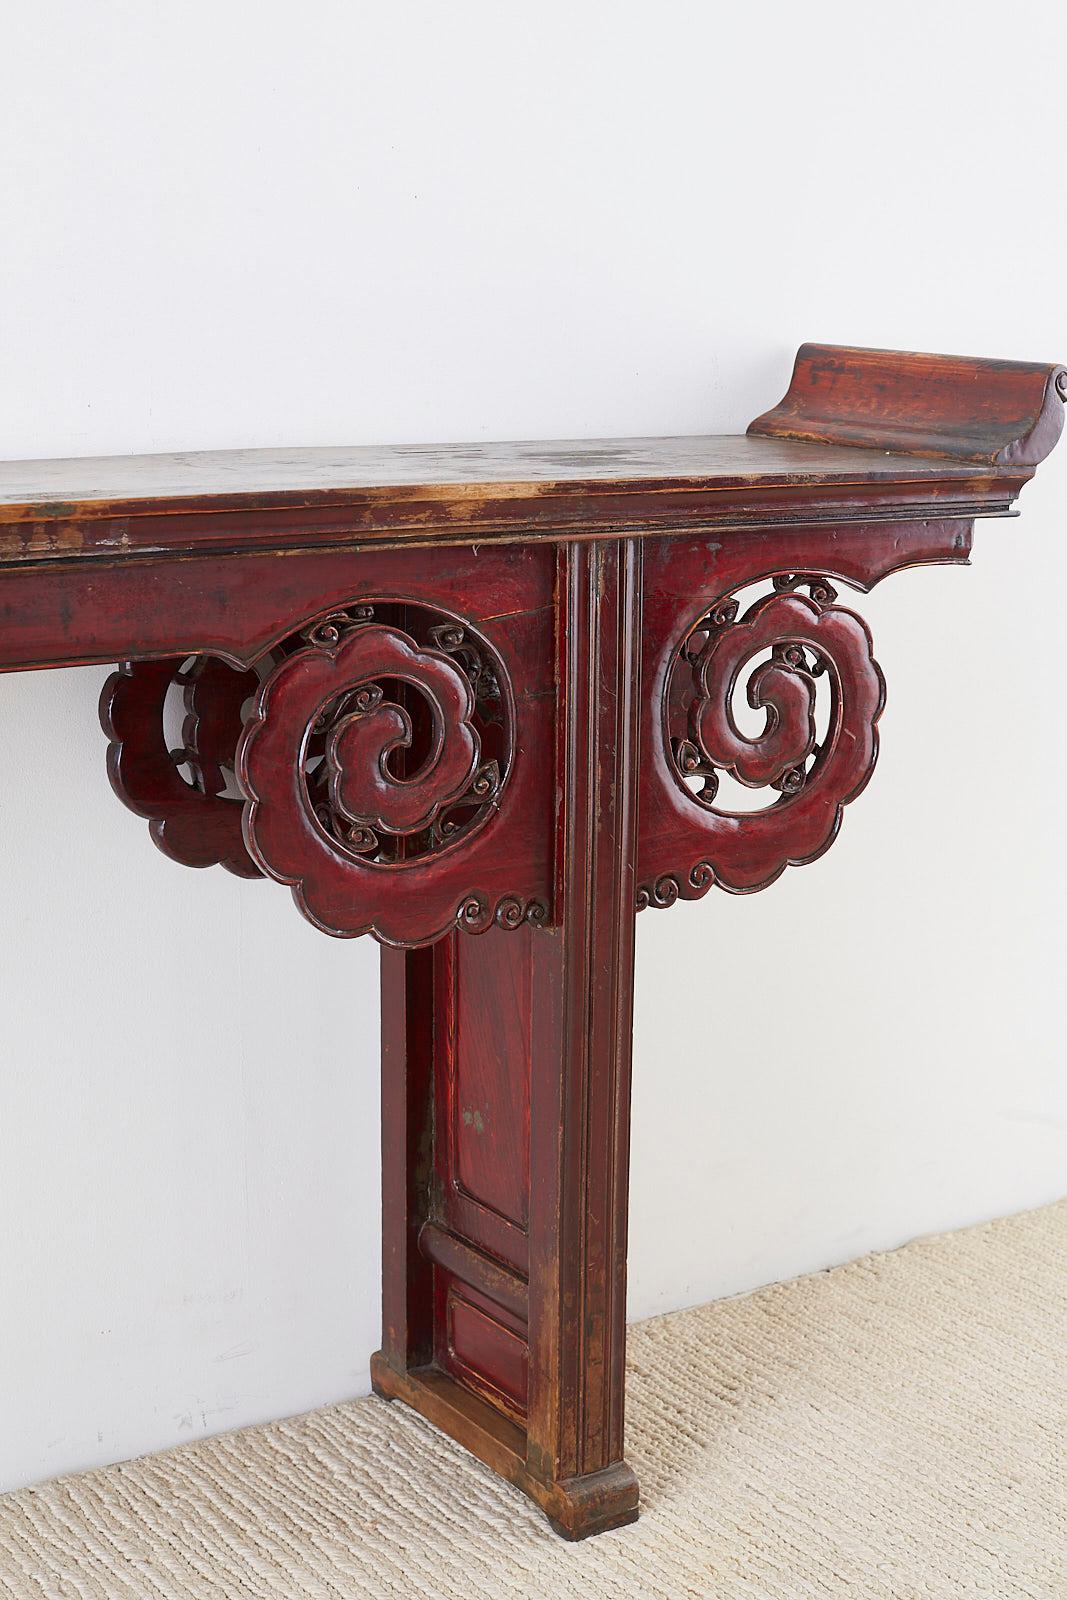 20th Century Monumental Chinese Qing Dynasty Altar Table or Console